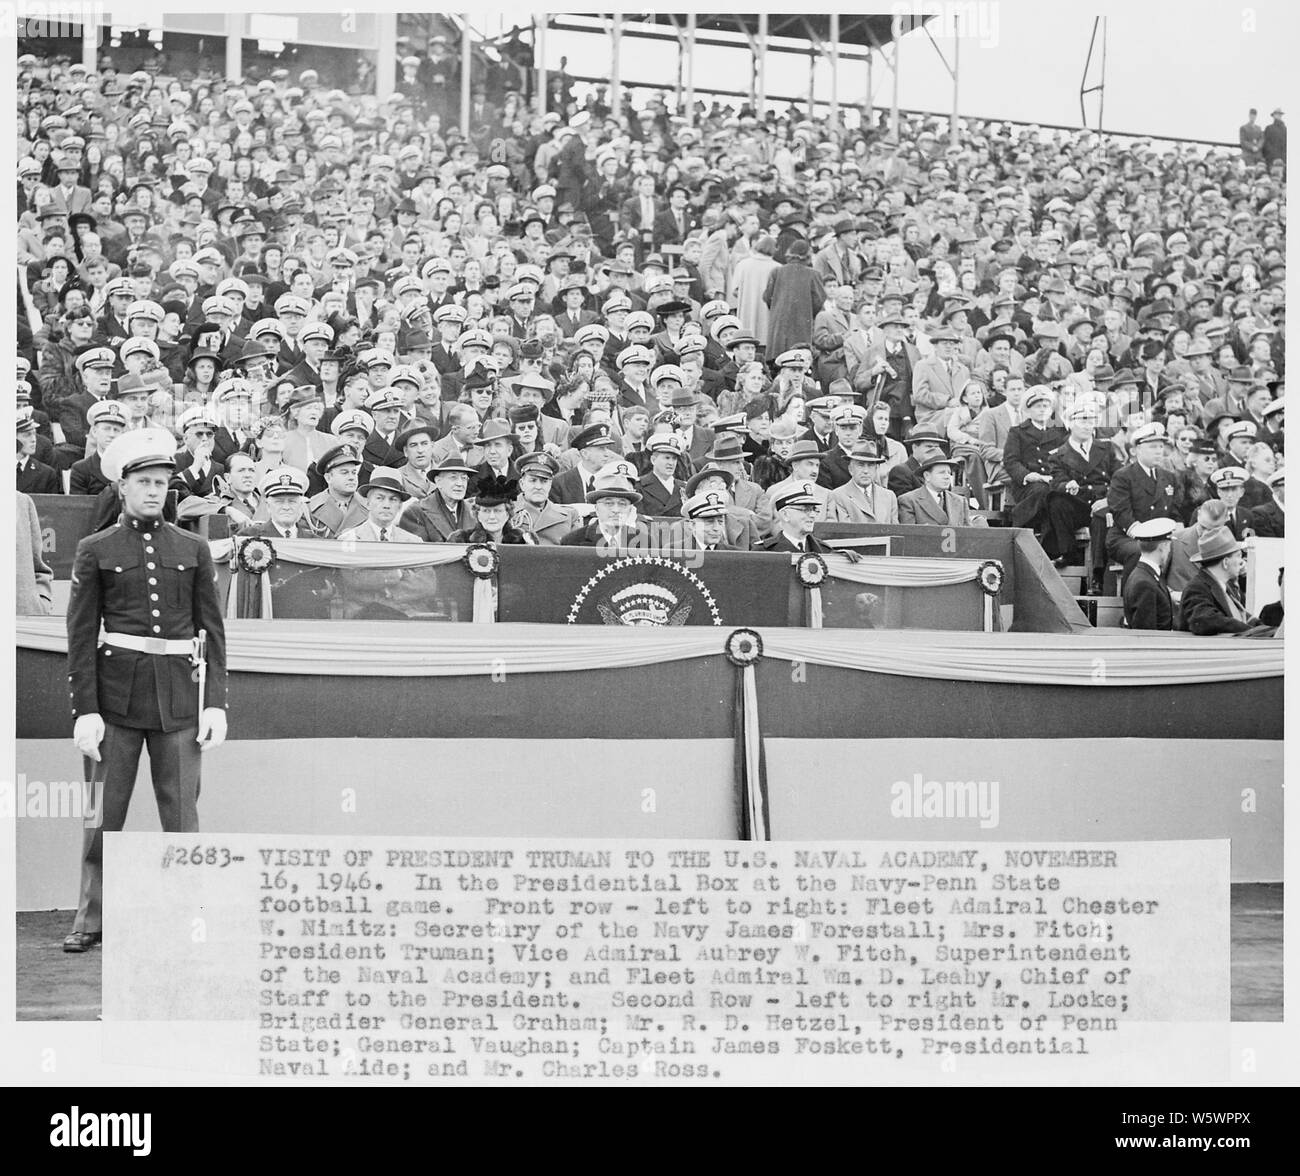 Photograph of the presidential box at the Penn State-Navy football game, during President Truman's visit to the U.S. Naval Academy; Scope and content:  Photograph of the presidential box at the Penn State-Navy football game, during the President's visit to the U.S. Naval Academy: (front row, left to right) Fleet Admiral Chester W. Nimitz; Secretary of the Navy James Forrestal; Mrs. Aubrey Fitch; the President; Vice Admiral Aubrey Fitch, Superintendent of the Naval Academy; and Fleet Admiral William D. Leahy (second row, left to right) White House aide Edwin Locke, Jr.; General Wallace Graham, Stock Photo